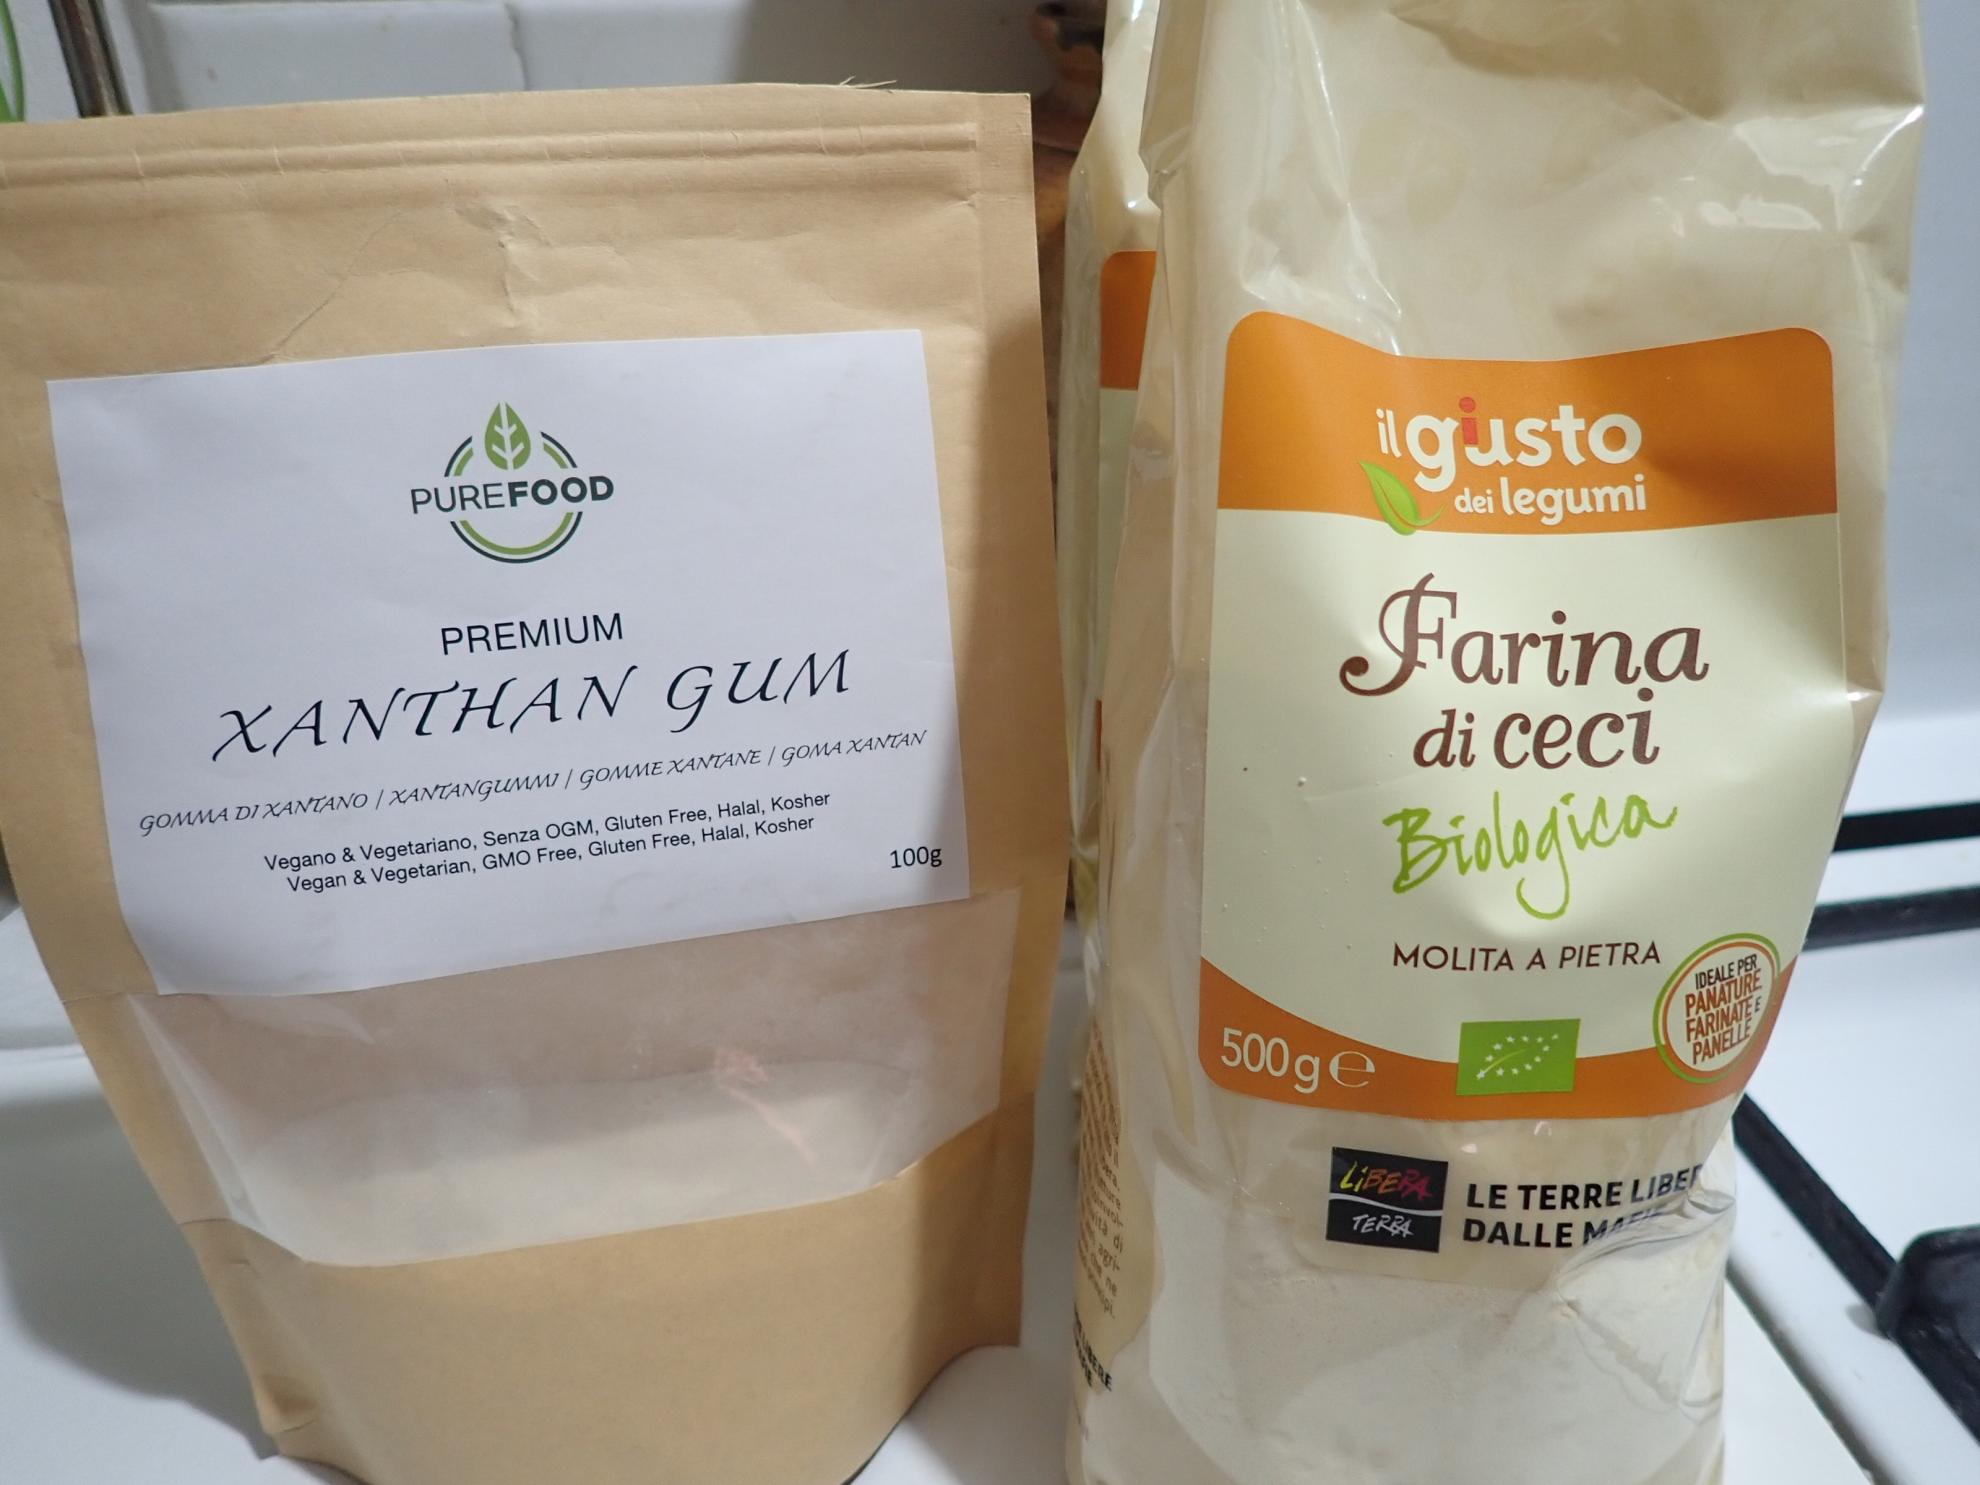 Chickpea flour and zanthan gum